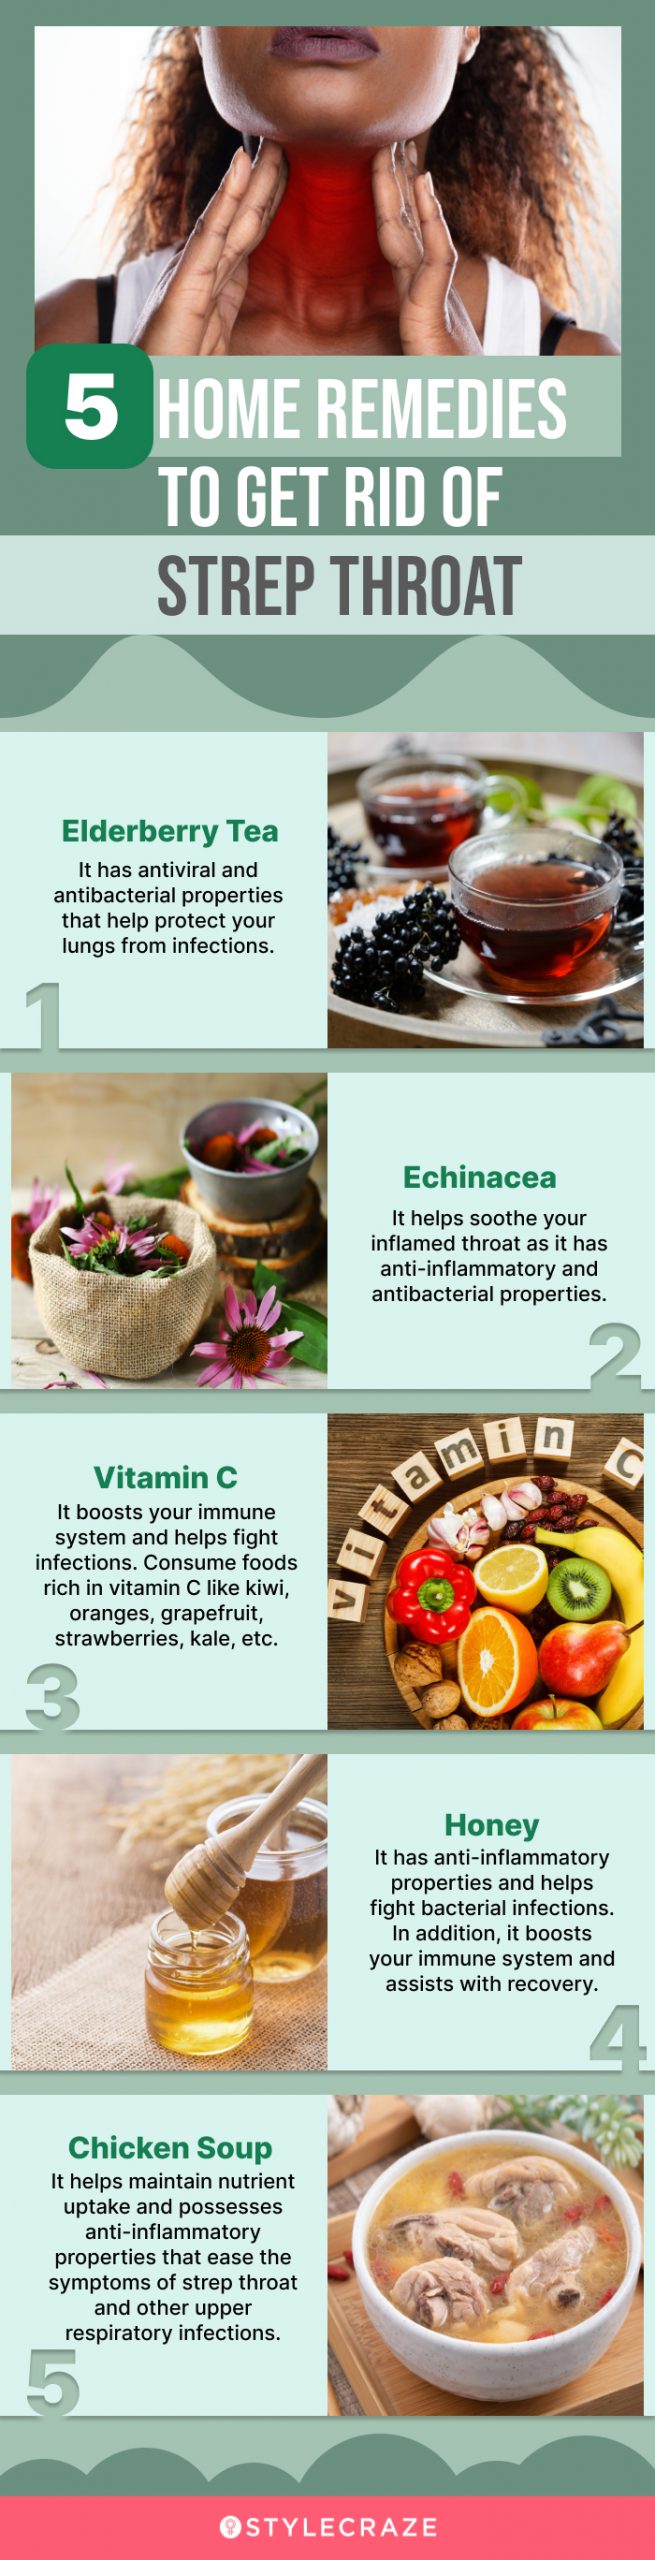 5 home remedies to get rid of strep throat (infographic)